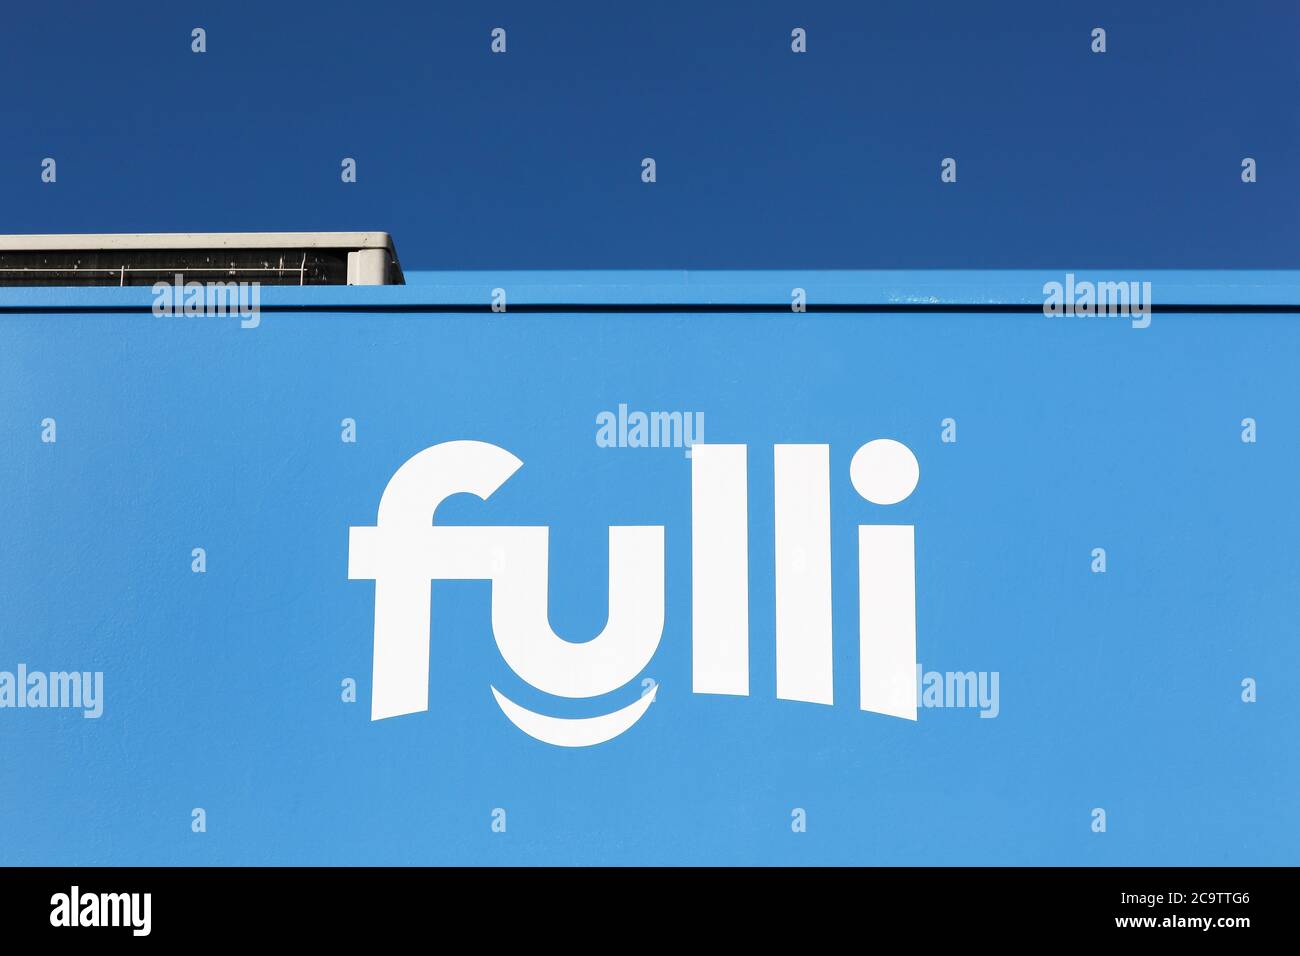 Drace, France - March 8, 2020: Fulli logo on a wall. Fulli is a low cost gasoline brand on APRR highways in France Stock Photo